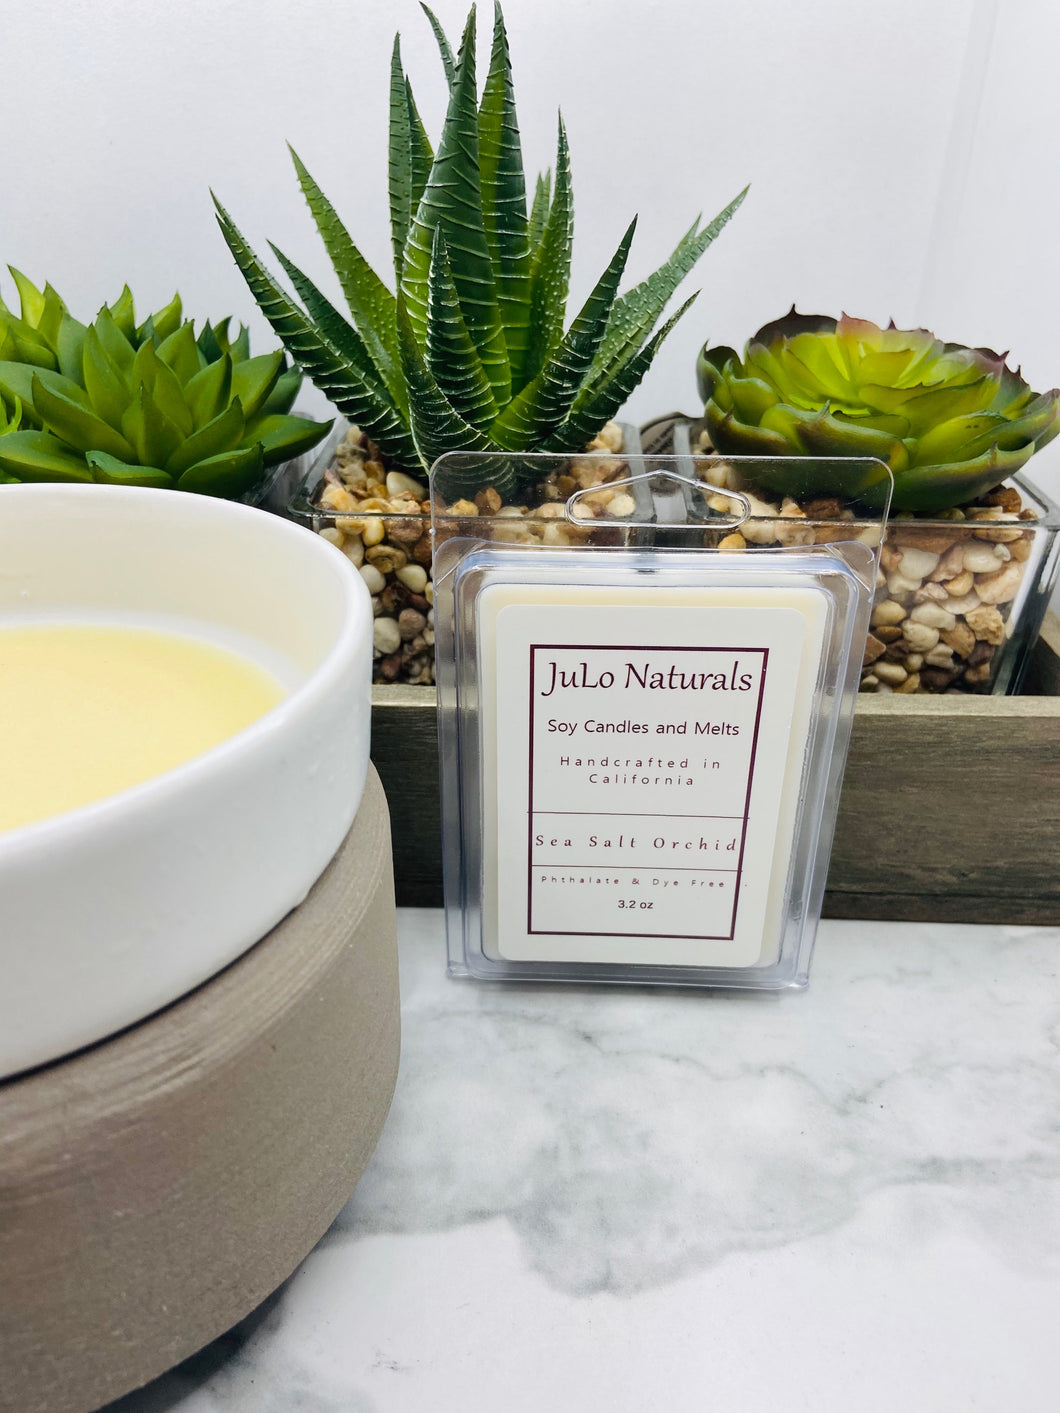 These luxury wax melts can be used in your favorite warmer and are the perfect gift for any occasion.